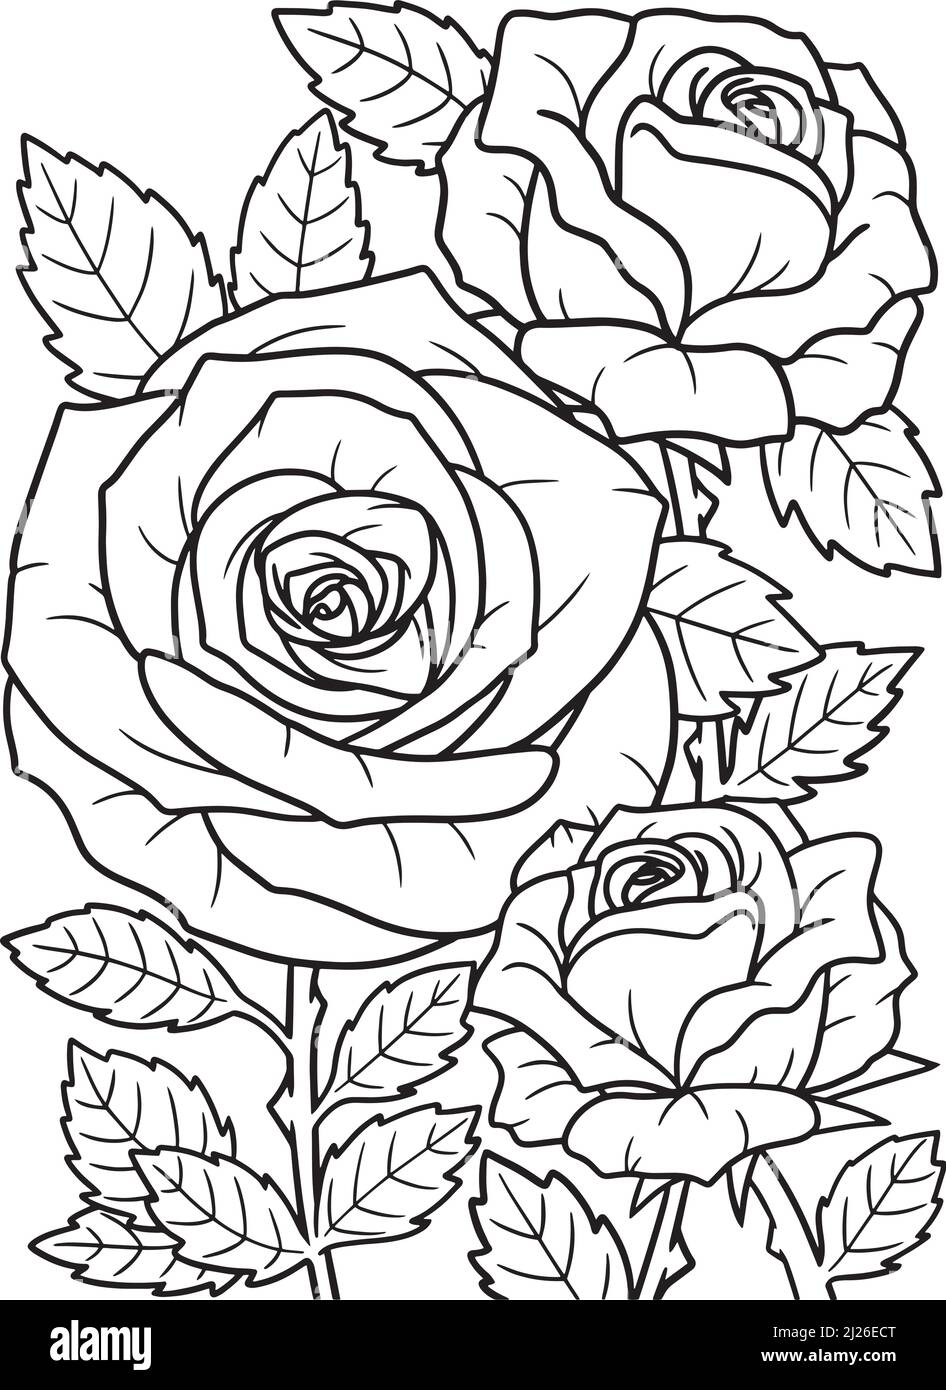 Rose Flower Coloring Page for Adults Stock Vector Image & Art   Alamy